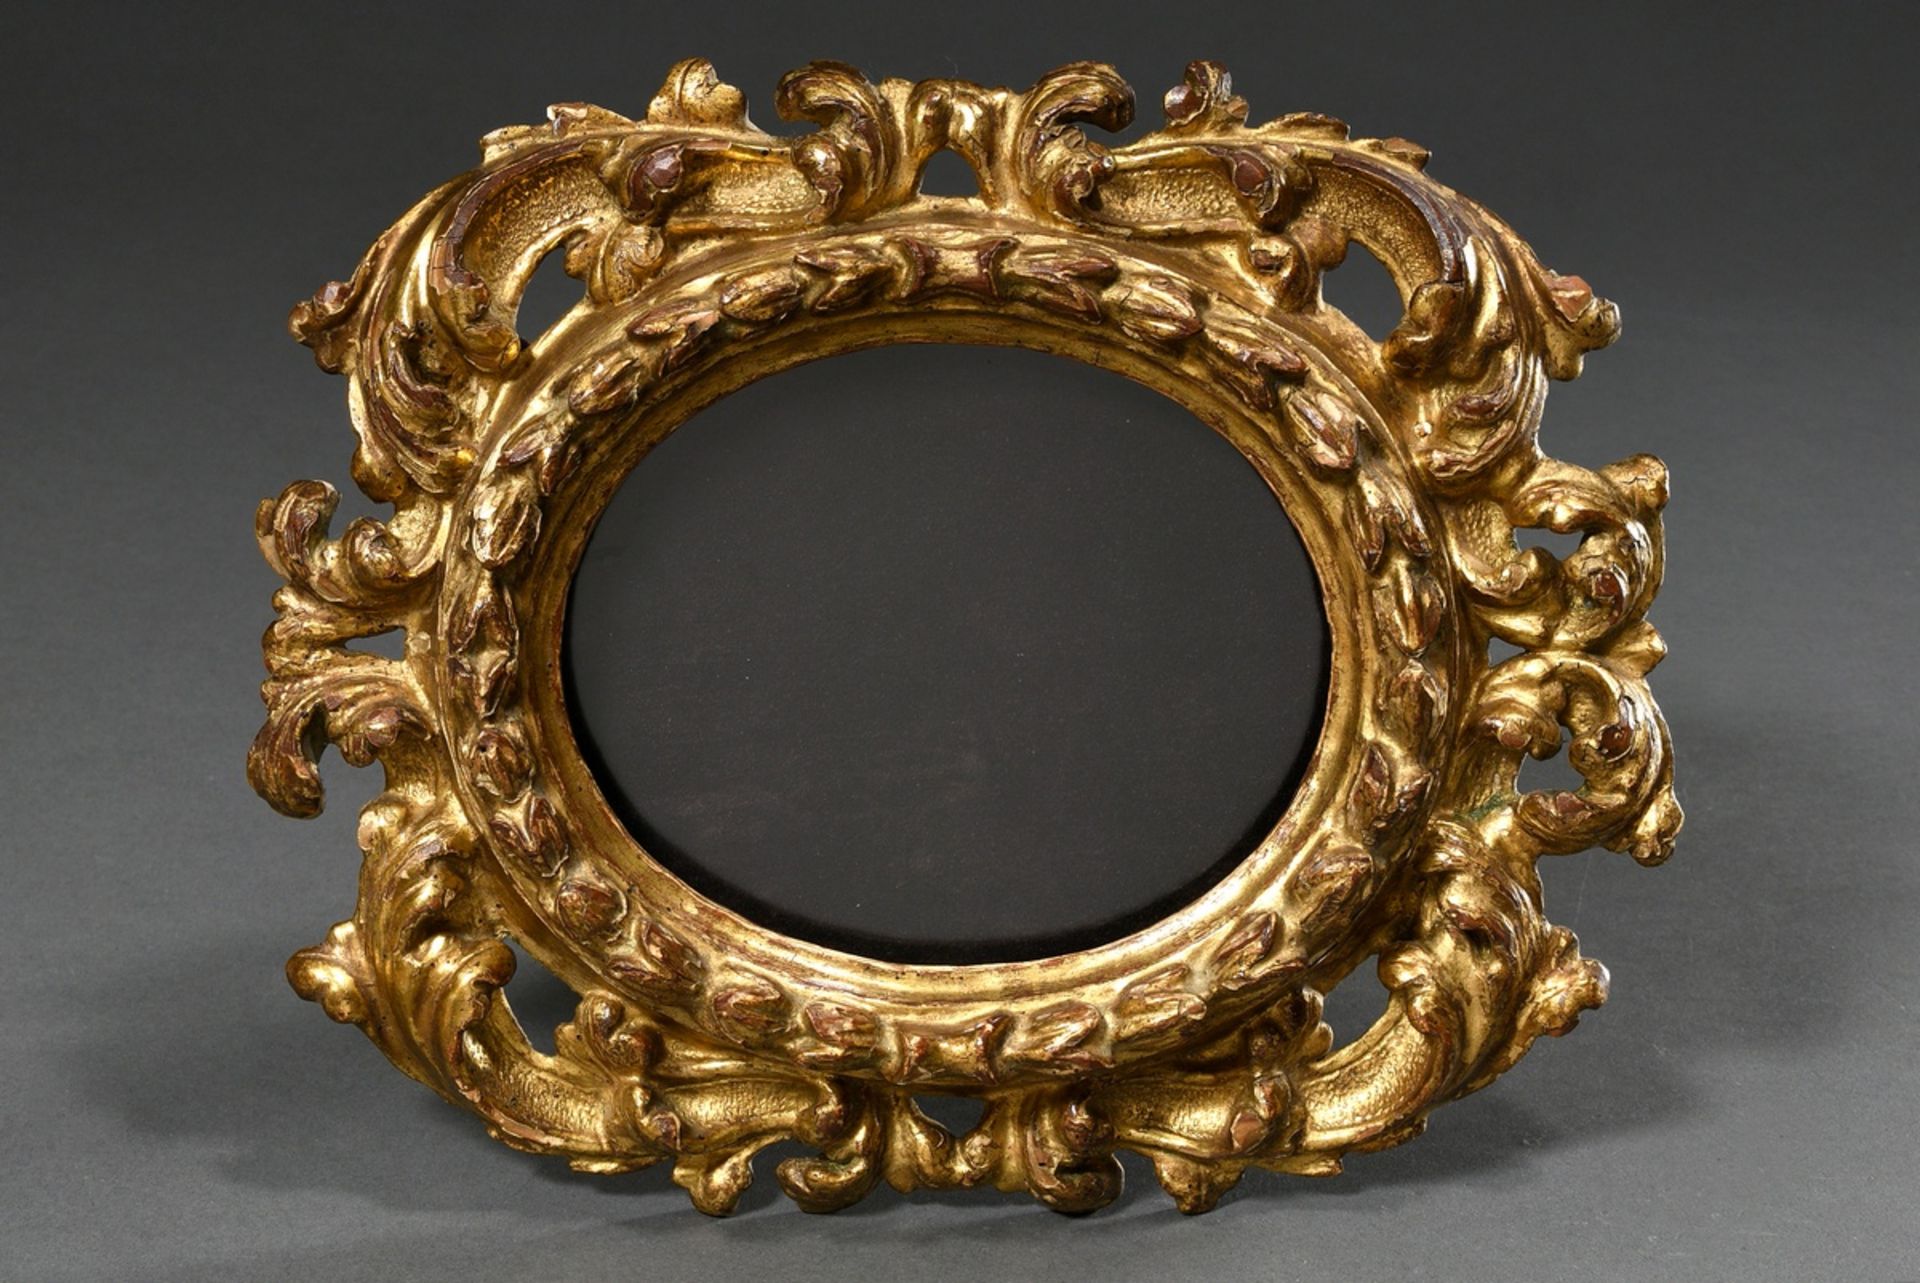 Oval baroque frame with detailed laurel and vine decoration, wood carved and gilded, 18th century,